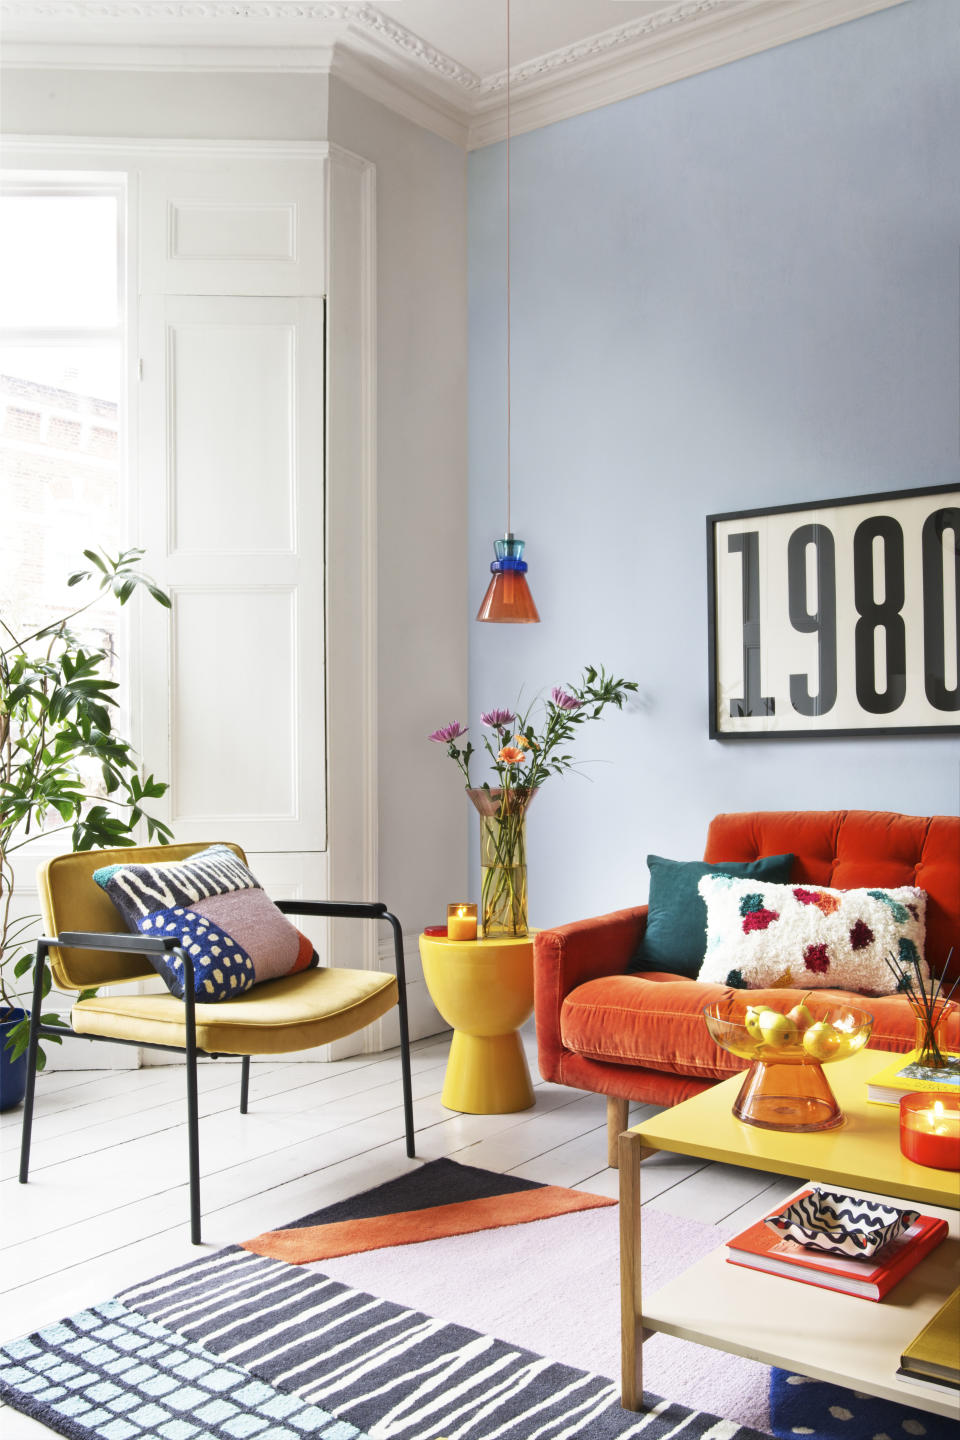 5. Brights blooms for a bright color scheme